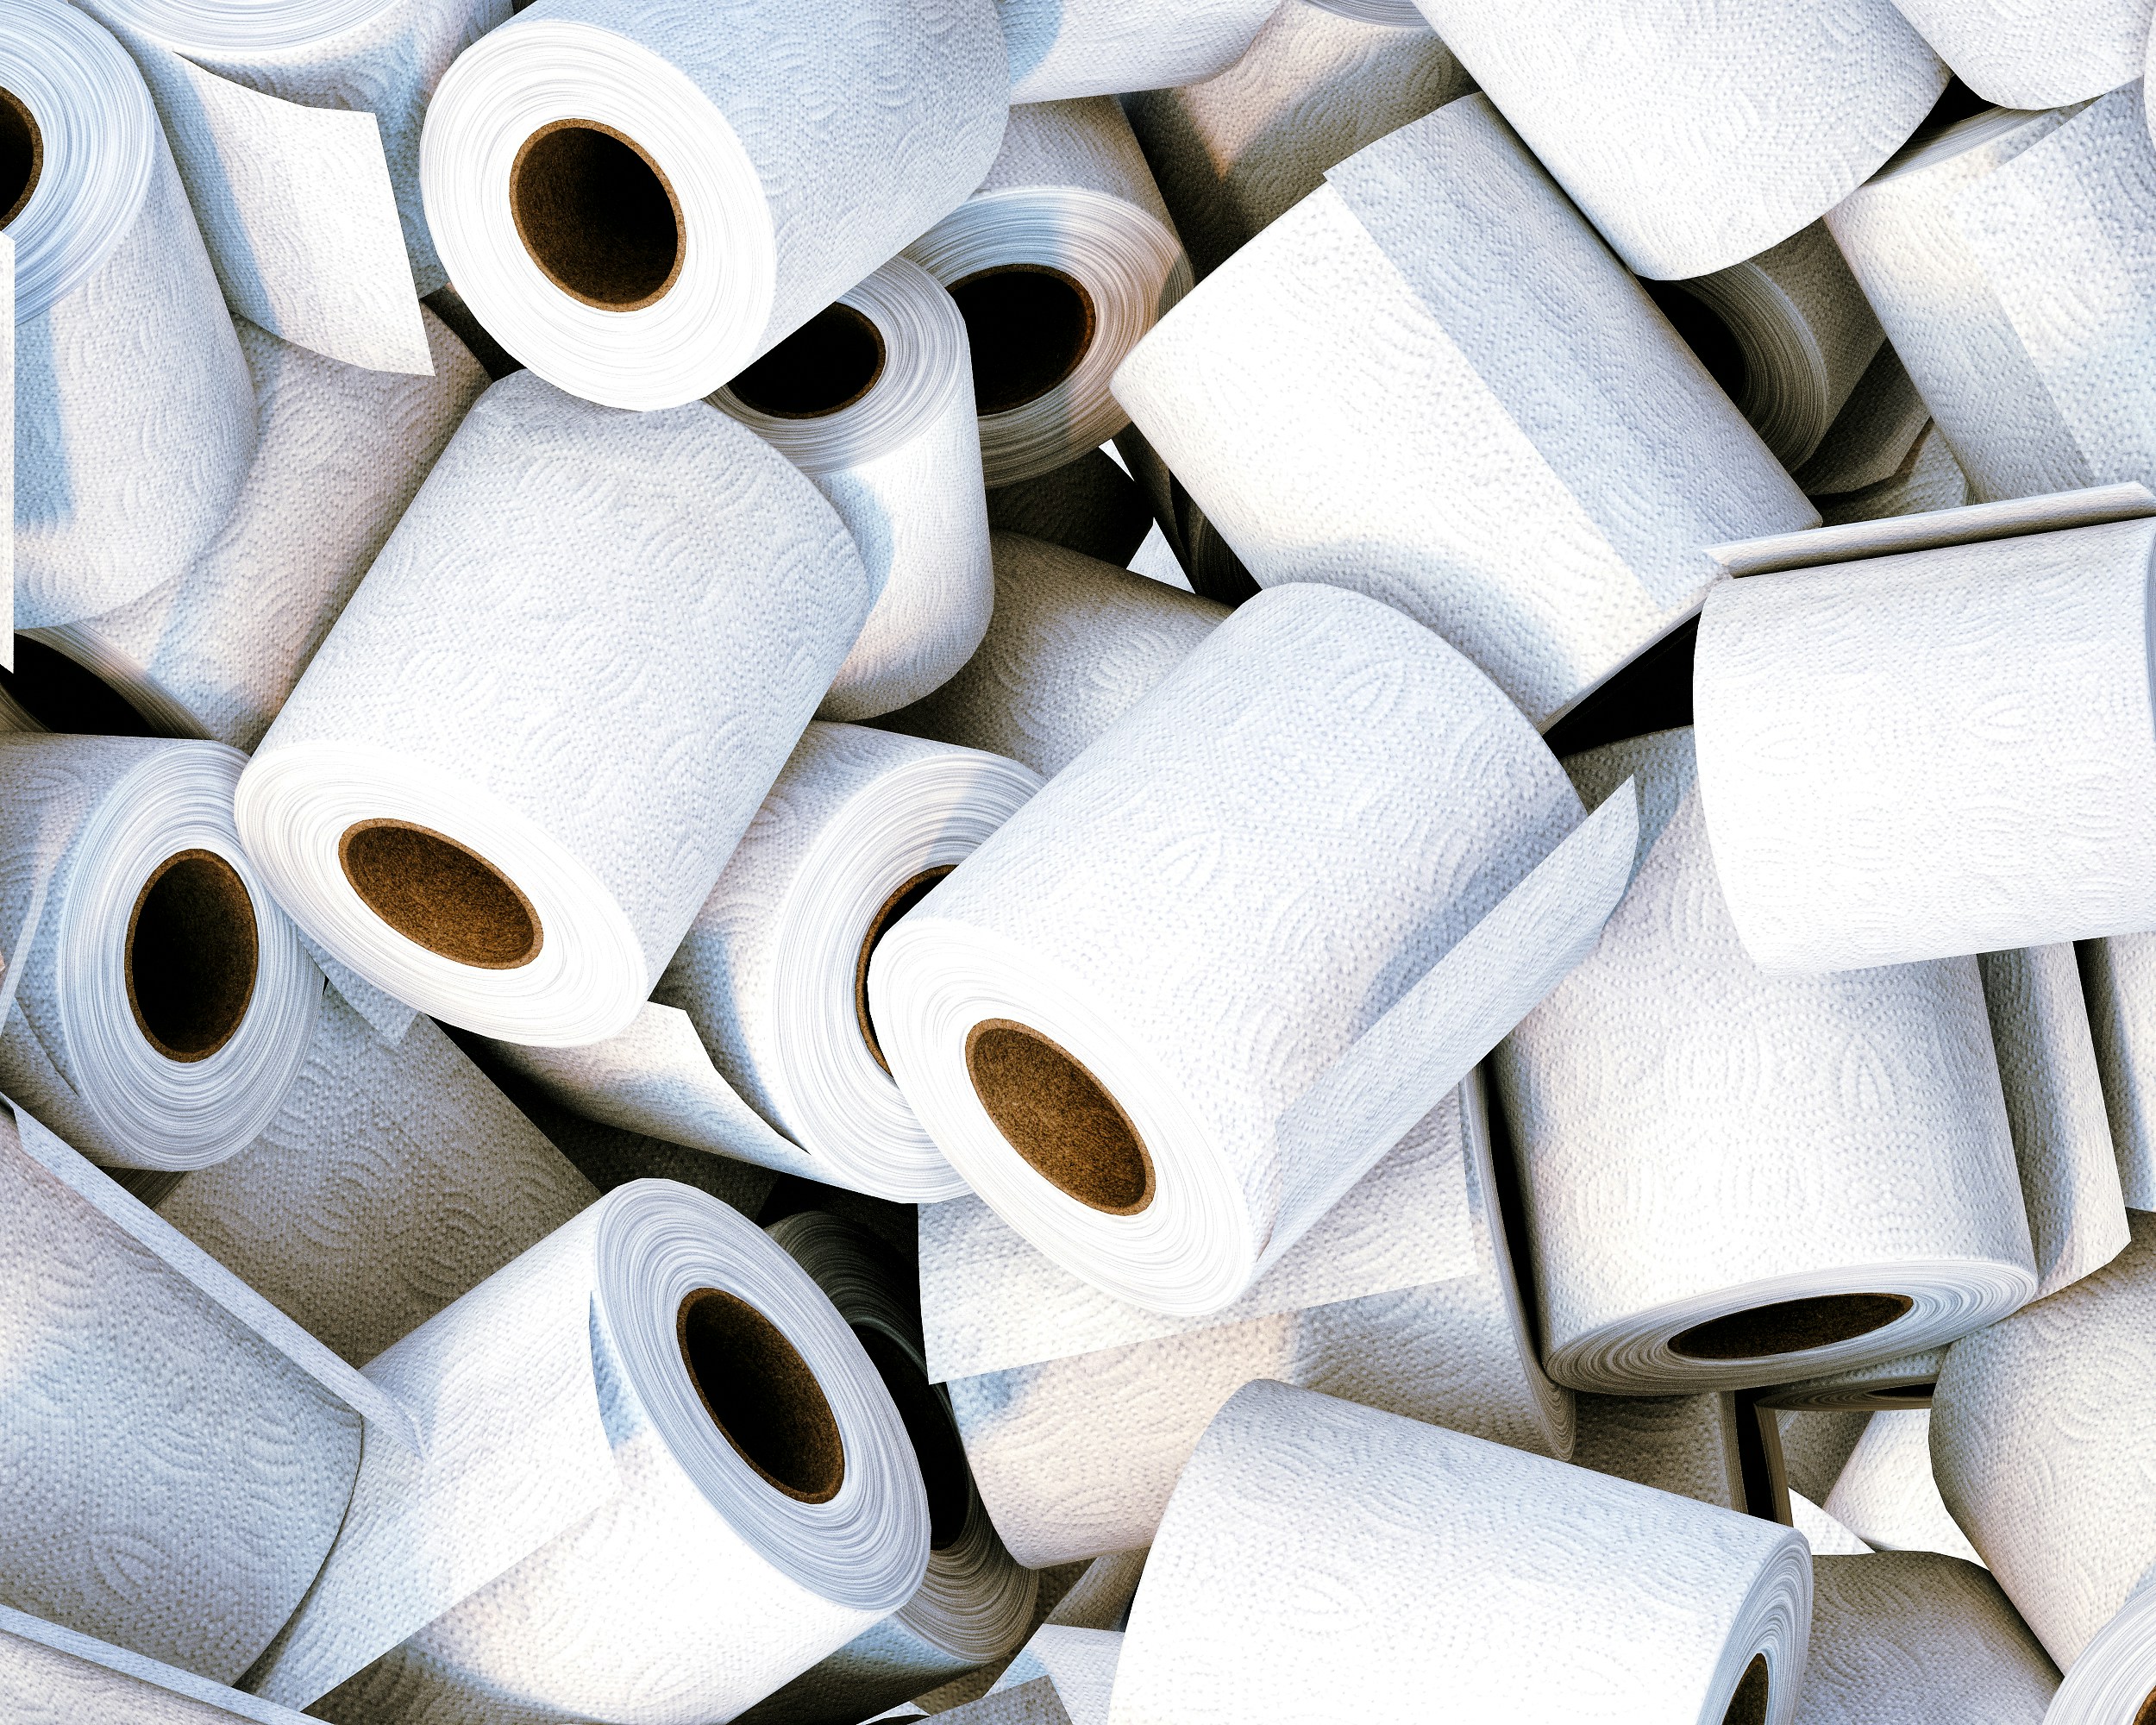 Can you flush toilet paper in Greece